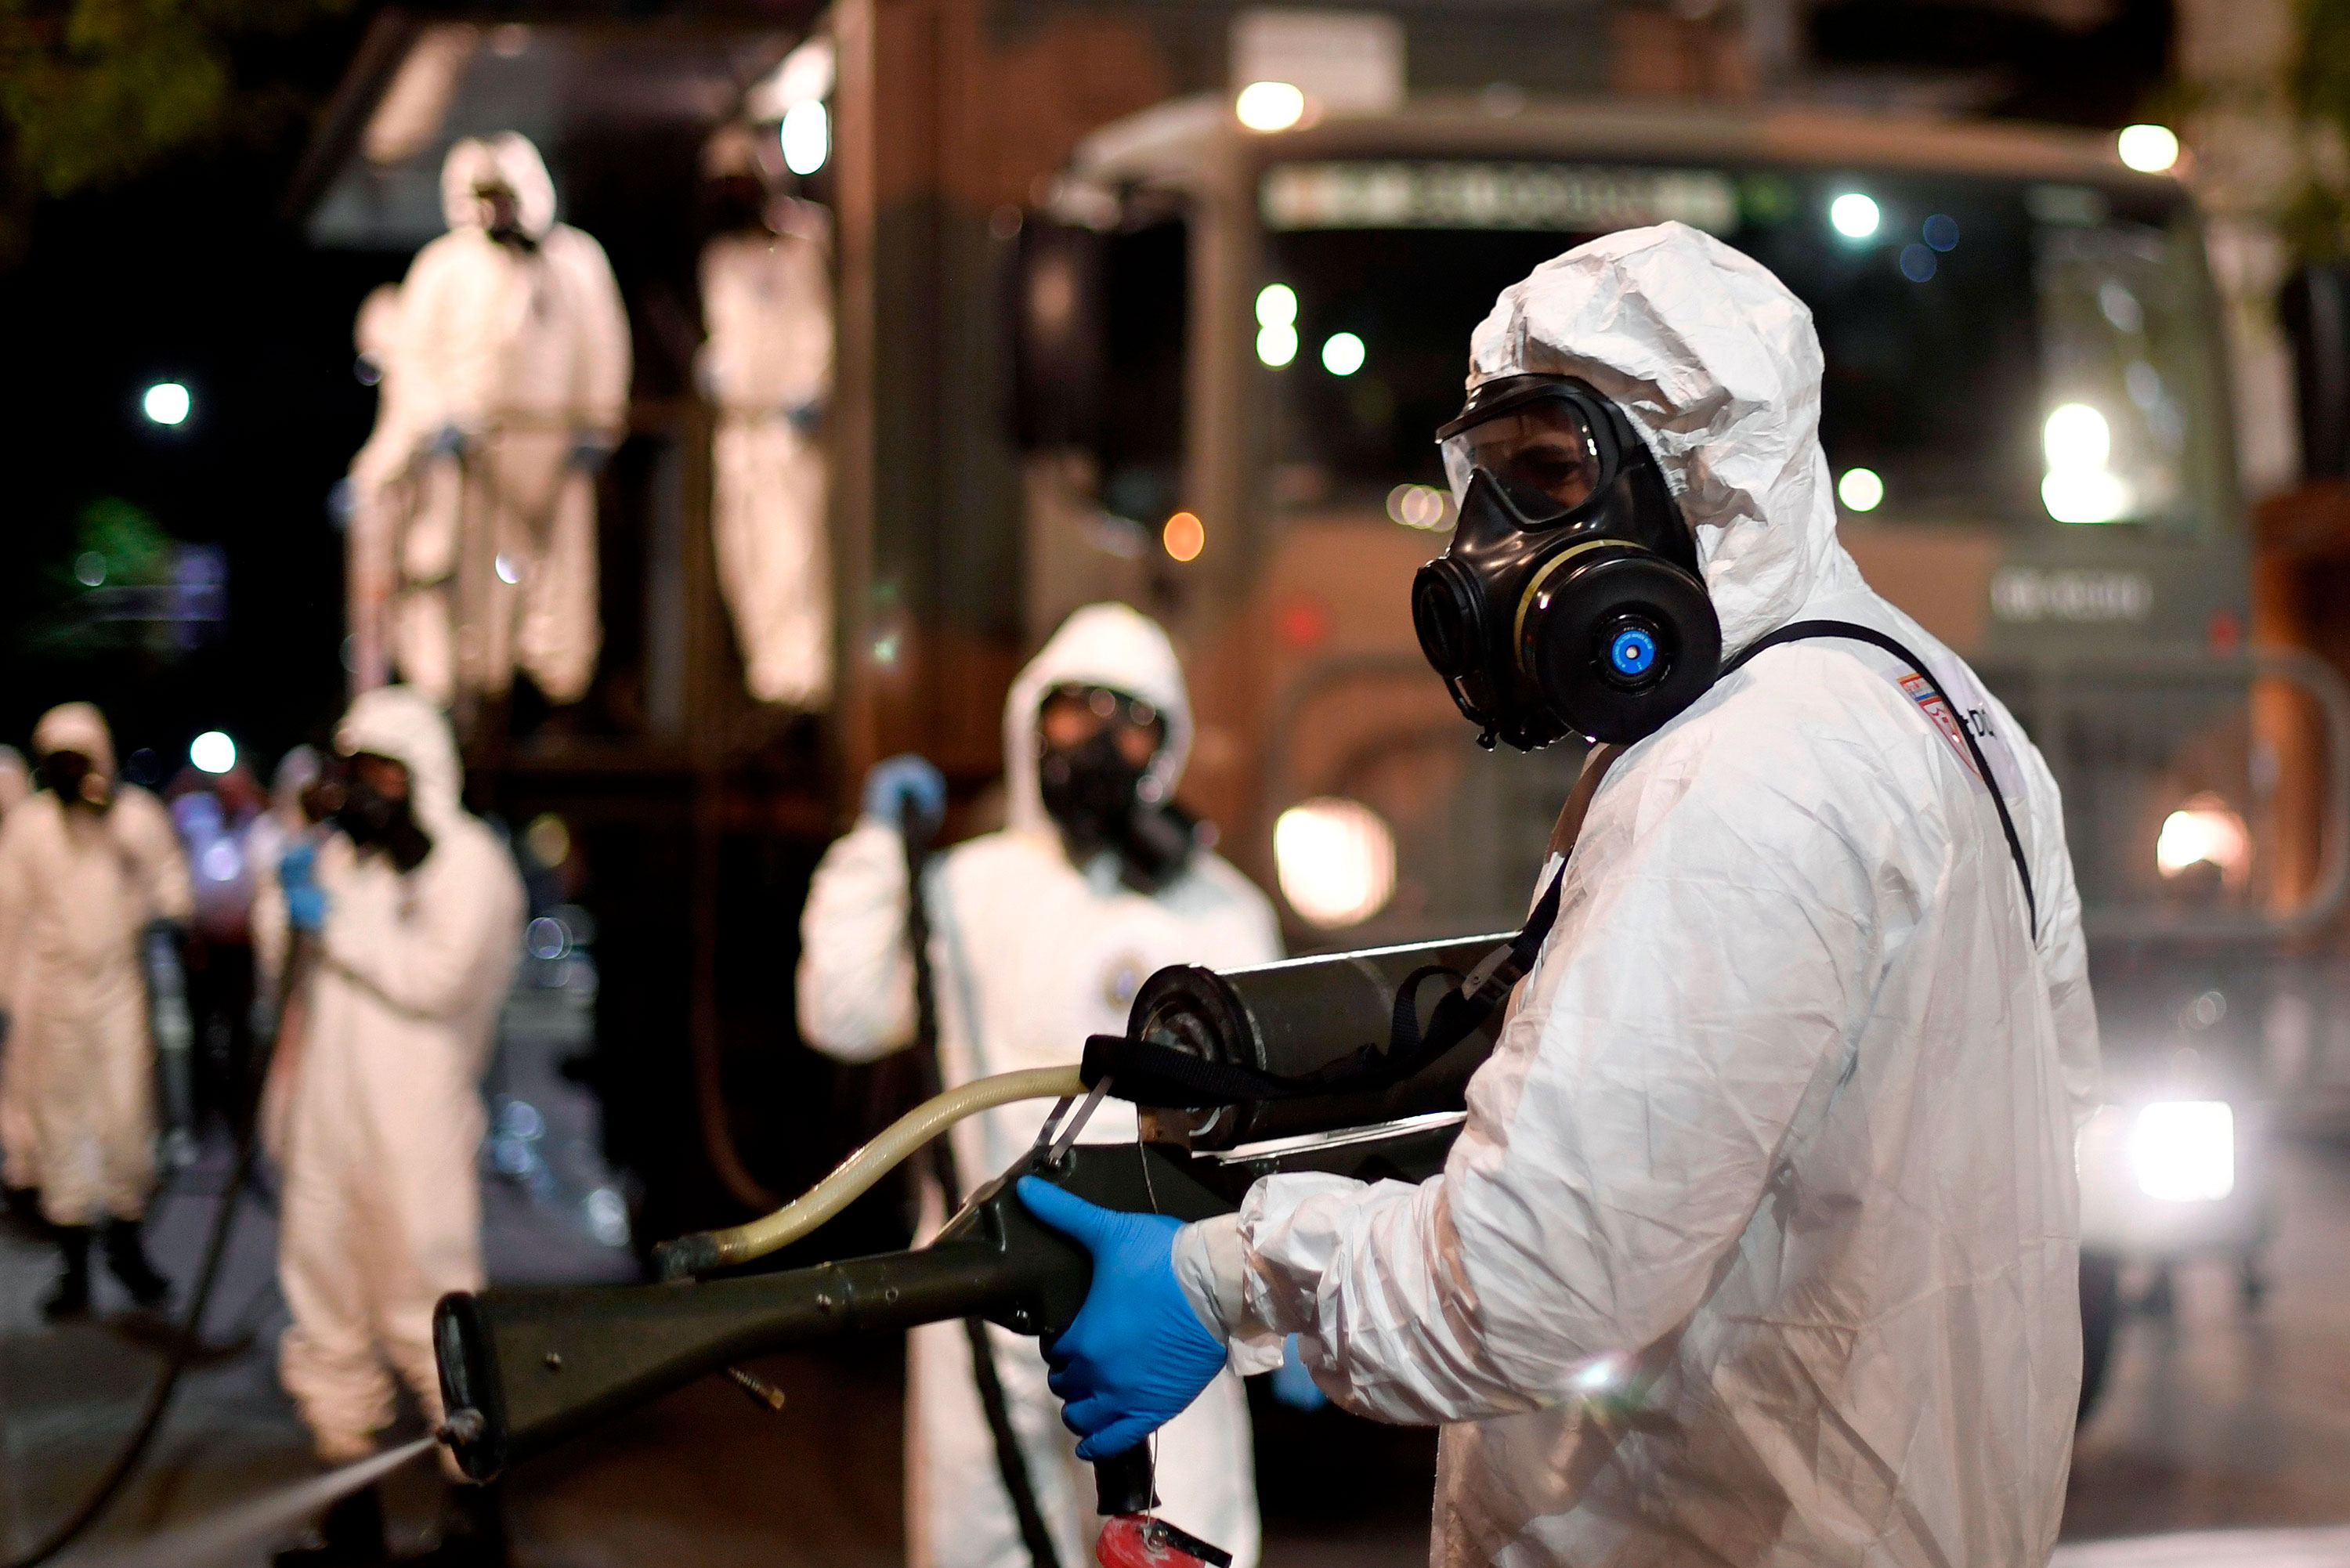 Soldiers spray disinfectant at a market in Belo Horizonte, Brazil, on August 18.